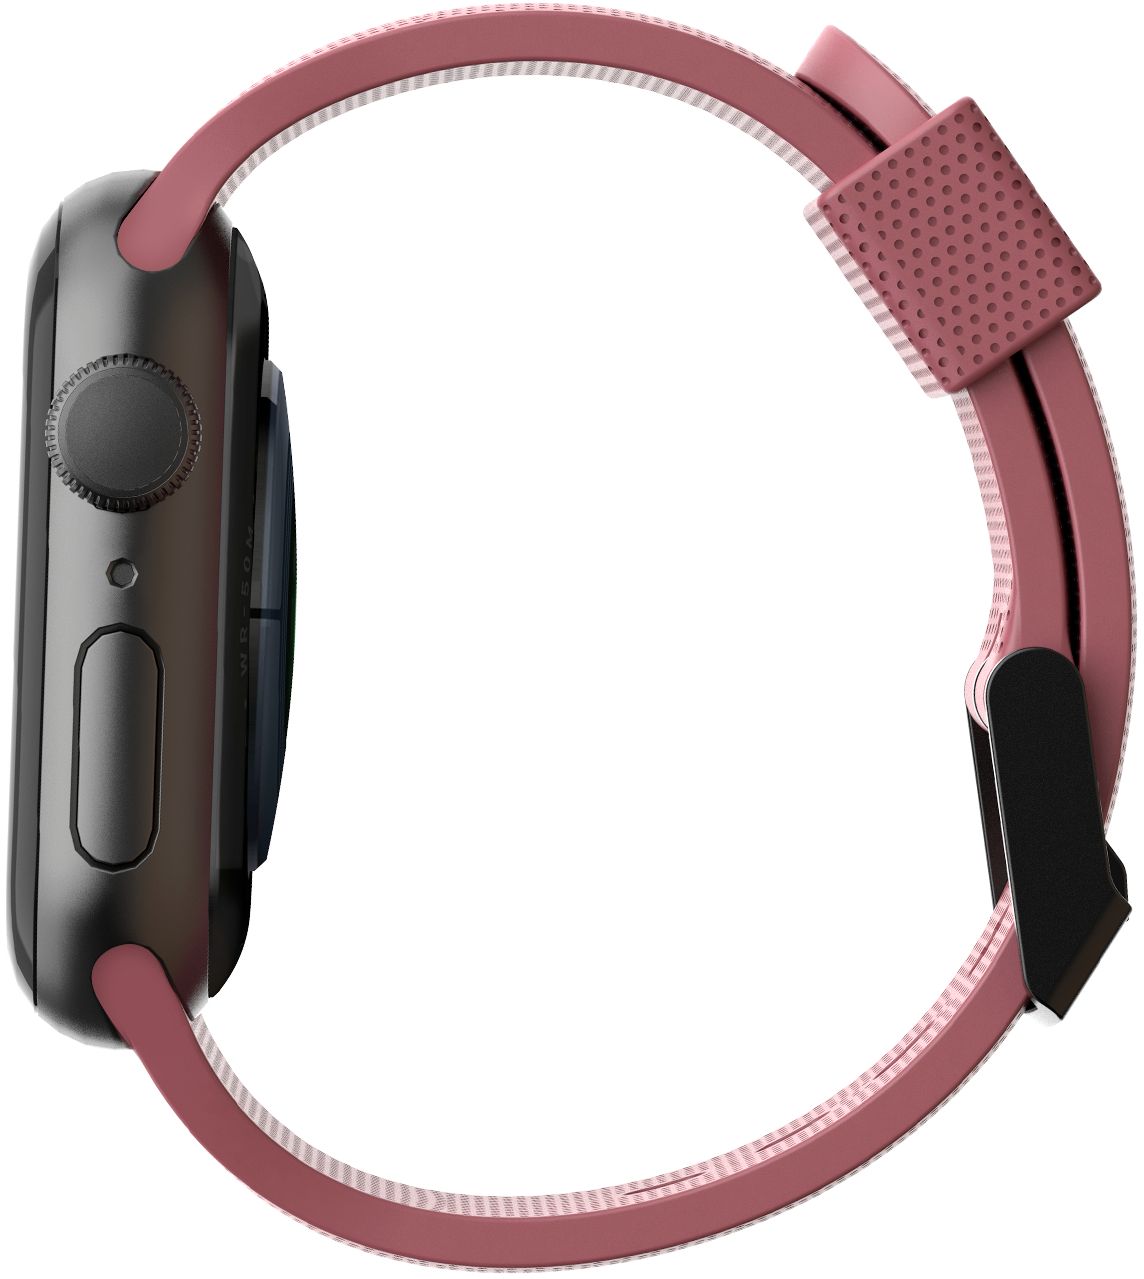 Angle View: UAG - Apple Watch 42/44 - DOT - Silicone - Dusty Rose - BM